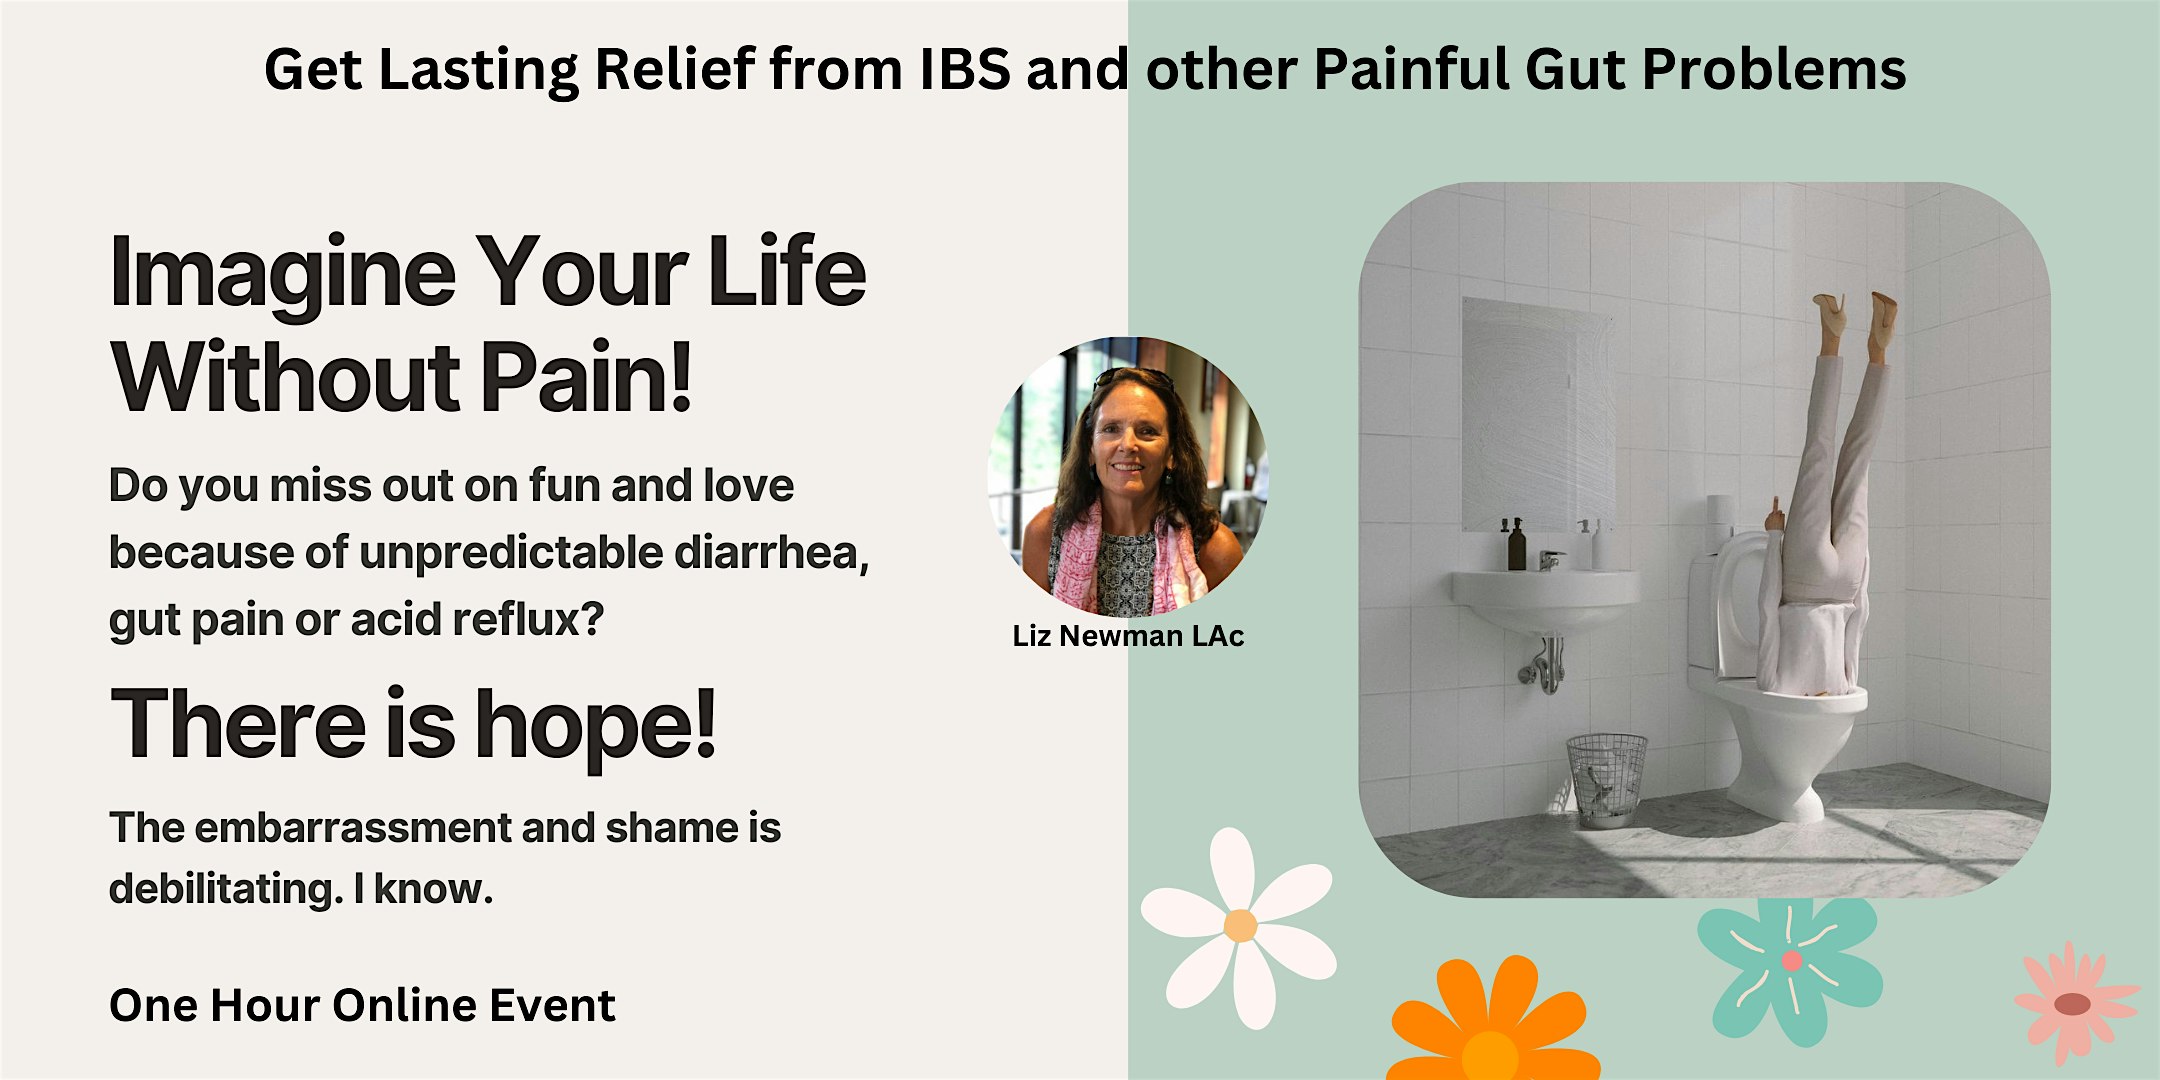 Get Lasting Relief from IBS and Painful Gut Problems - Santa Ana  CA